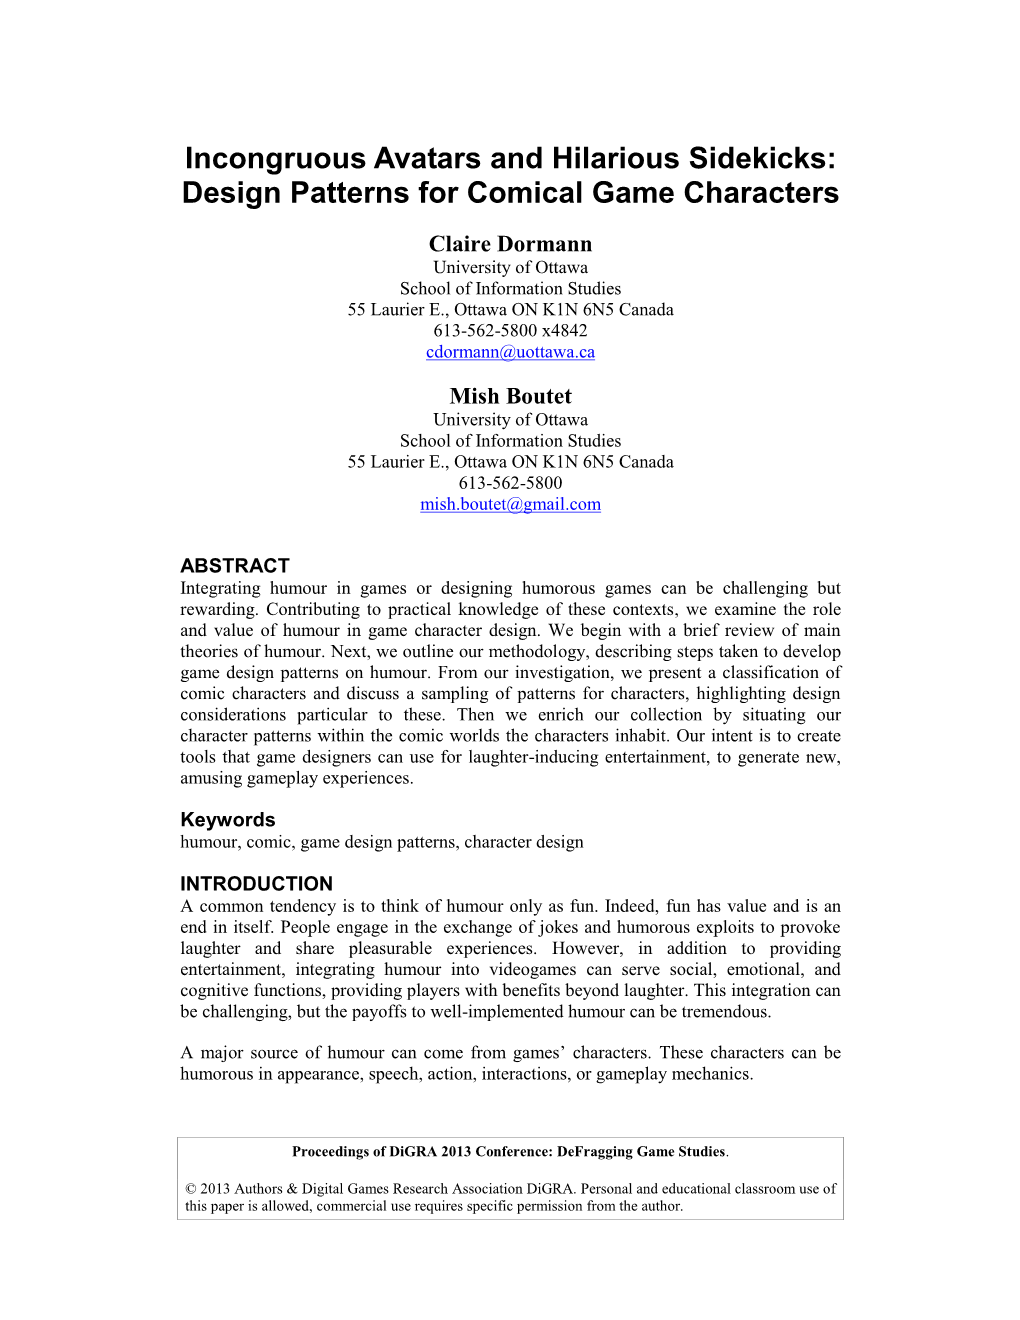 Incongruous Avatars and Hilarious Sidekicks: Design Patterns for Comical Game Characters